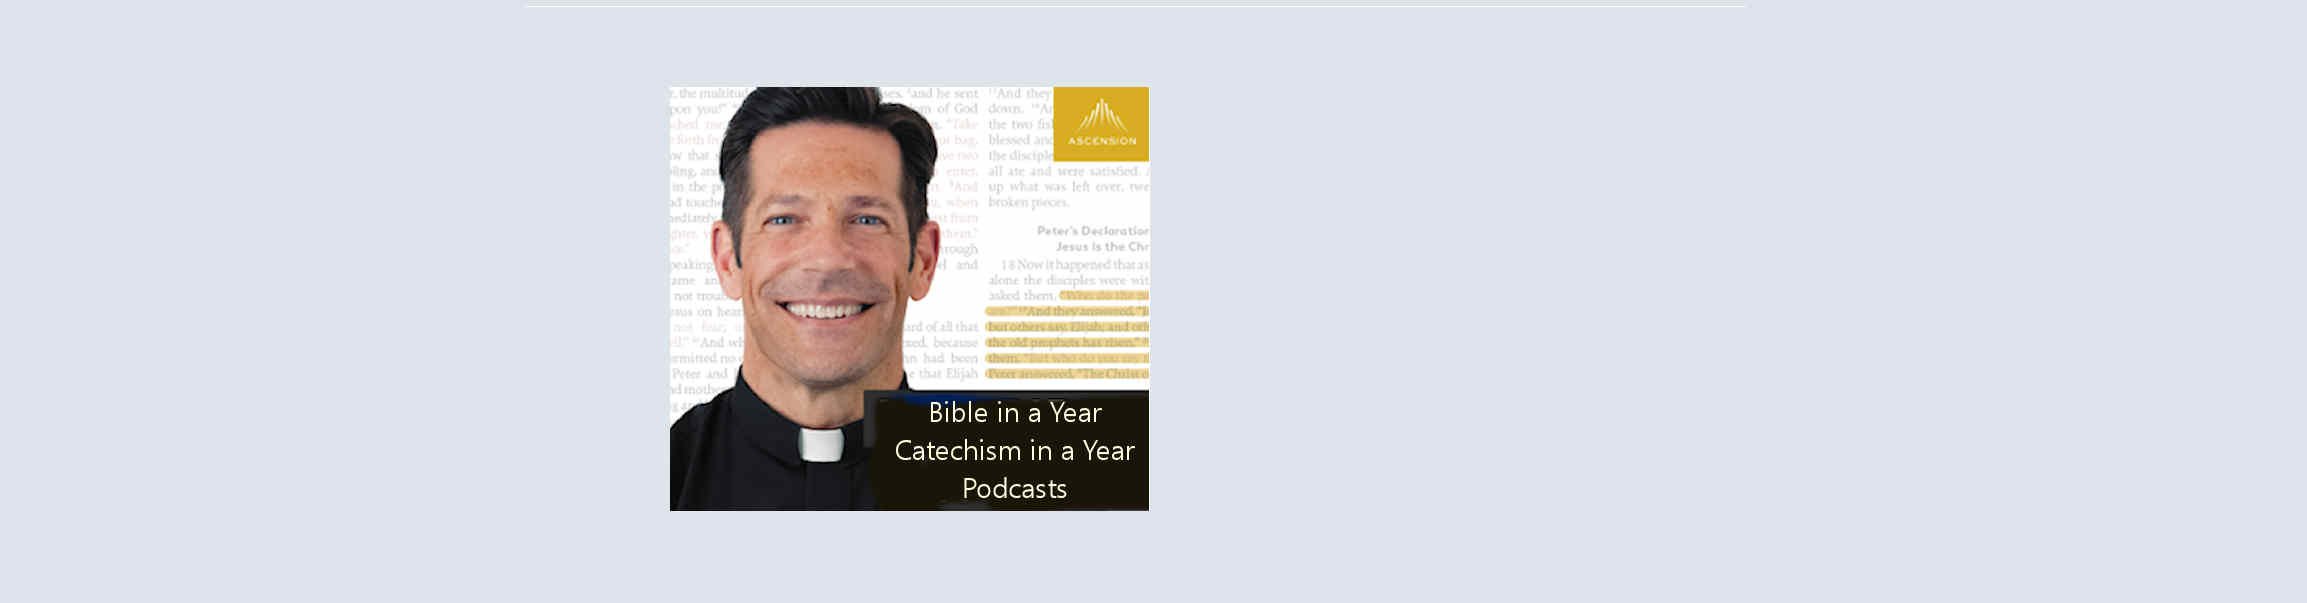 Bible & Catechism in a Year